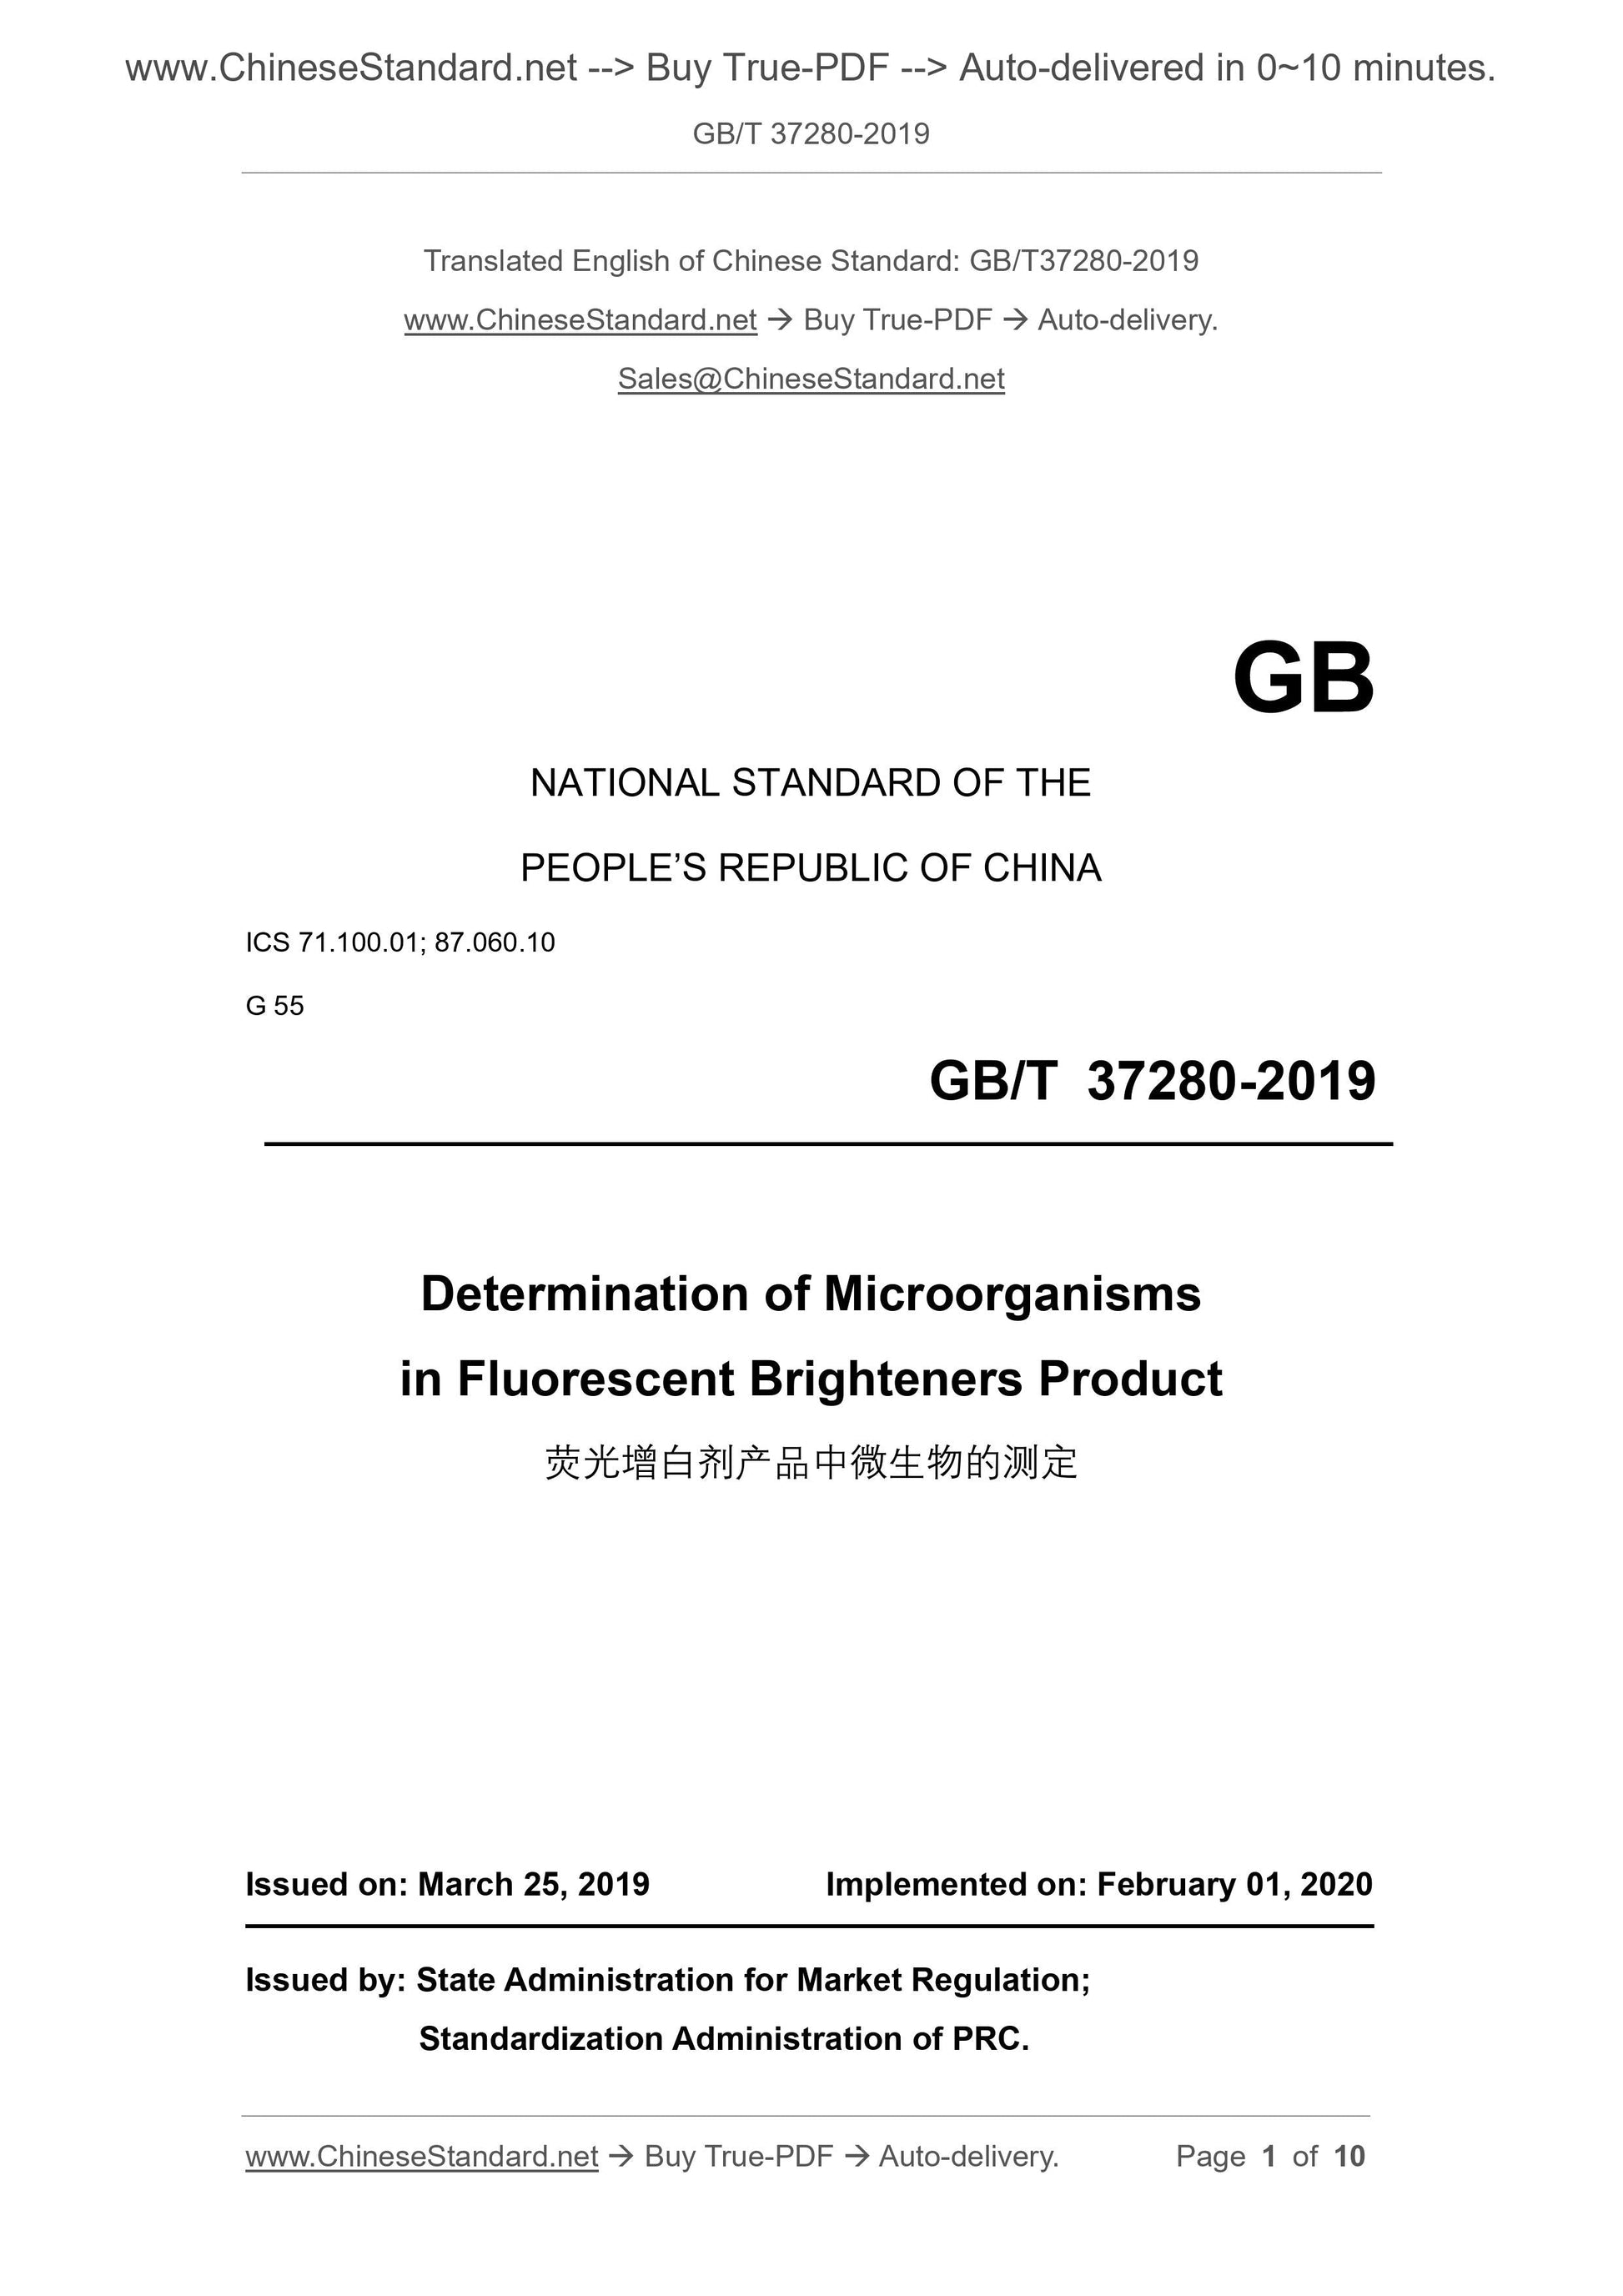 GB/T 37280-2019 Page 1